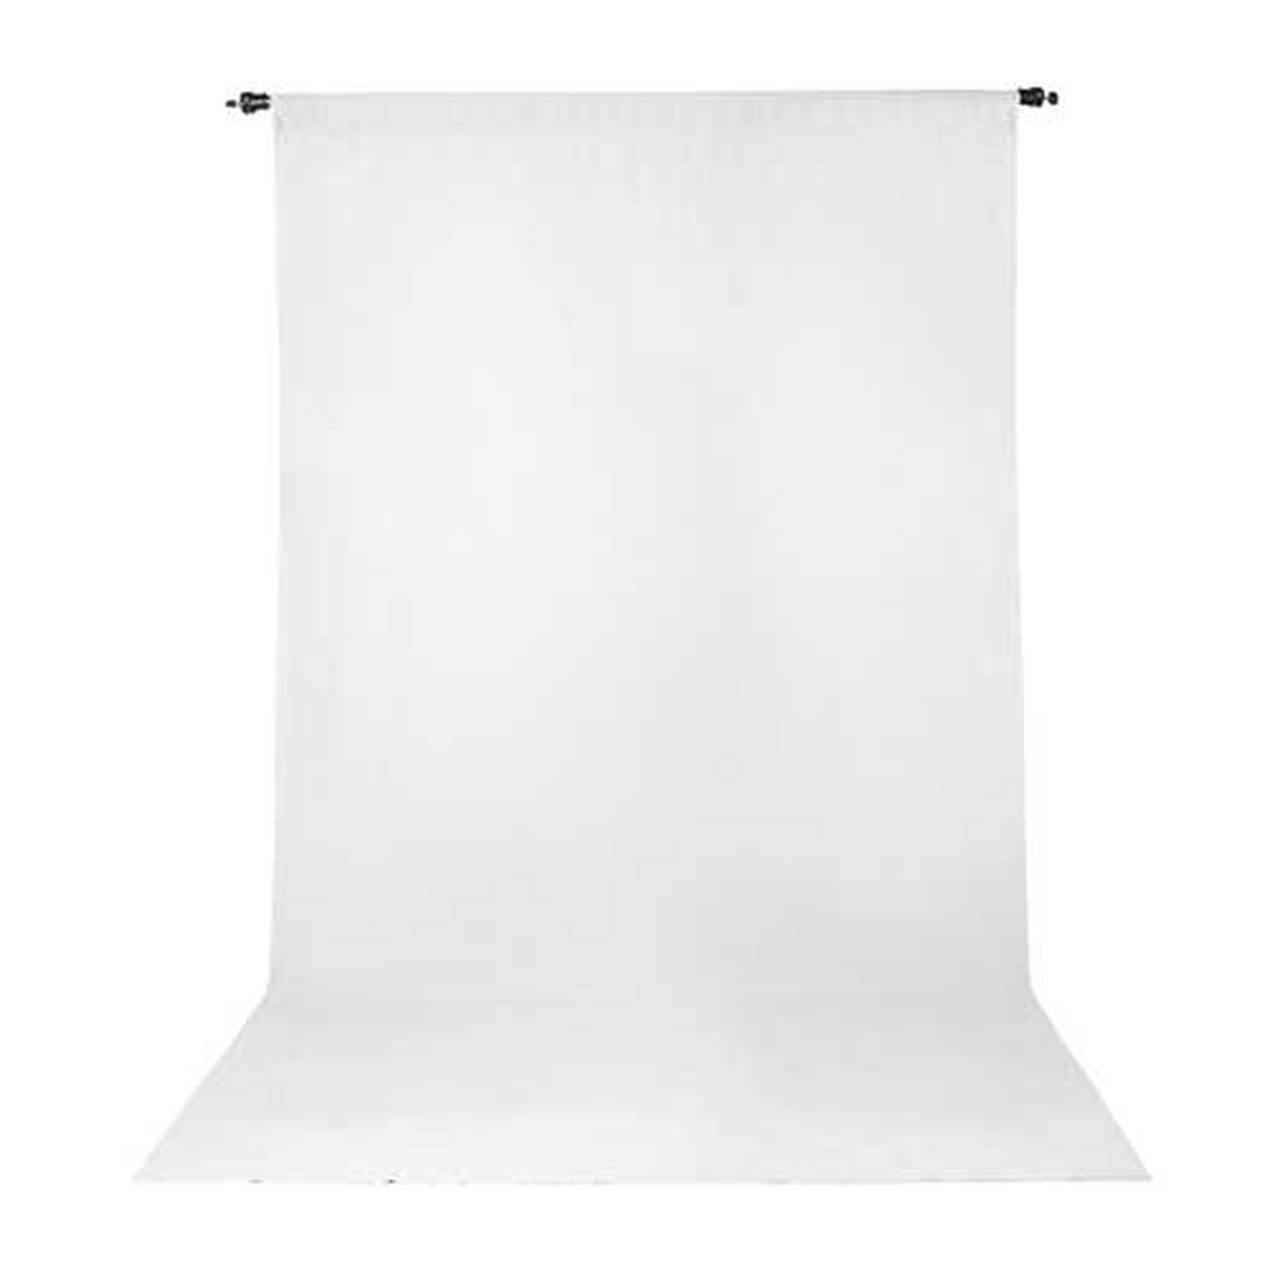 Promaster 2736 5'x9' White Wrinkle  Resistant Background